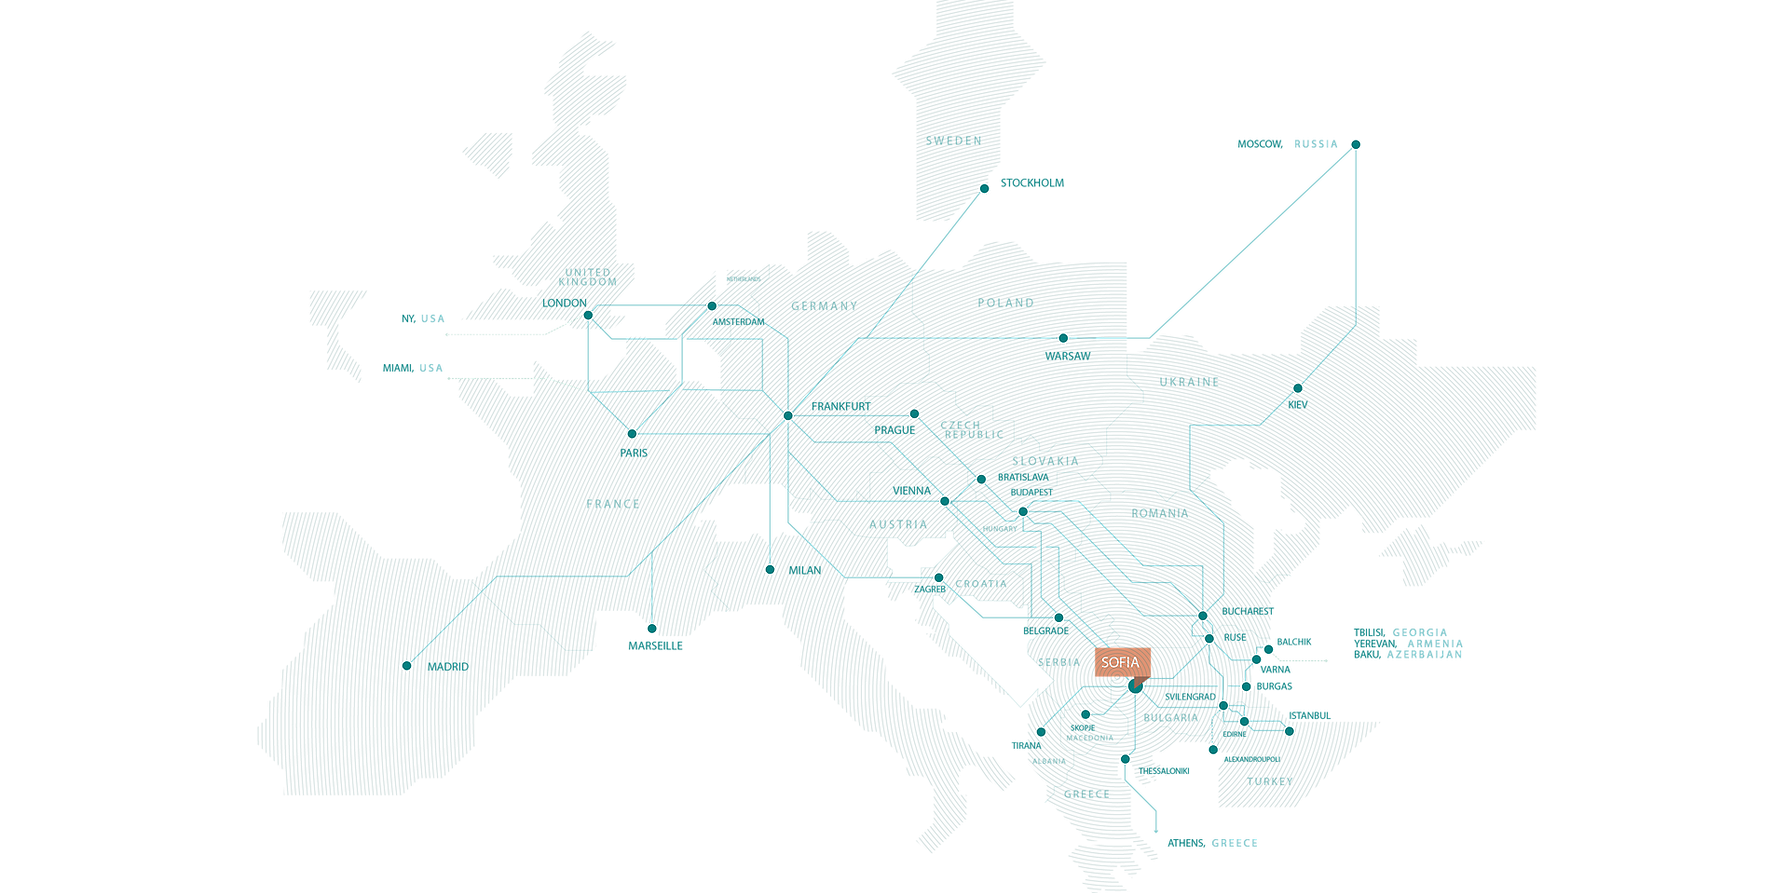 Network connections map